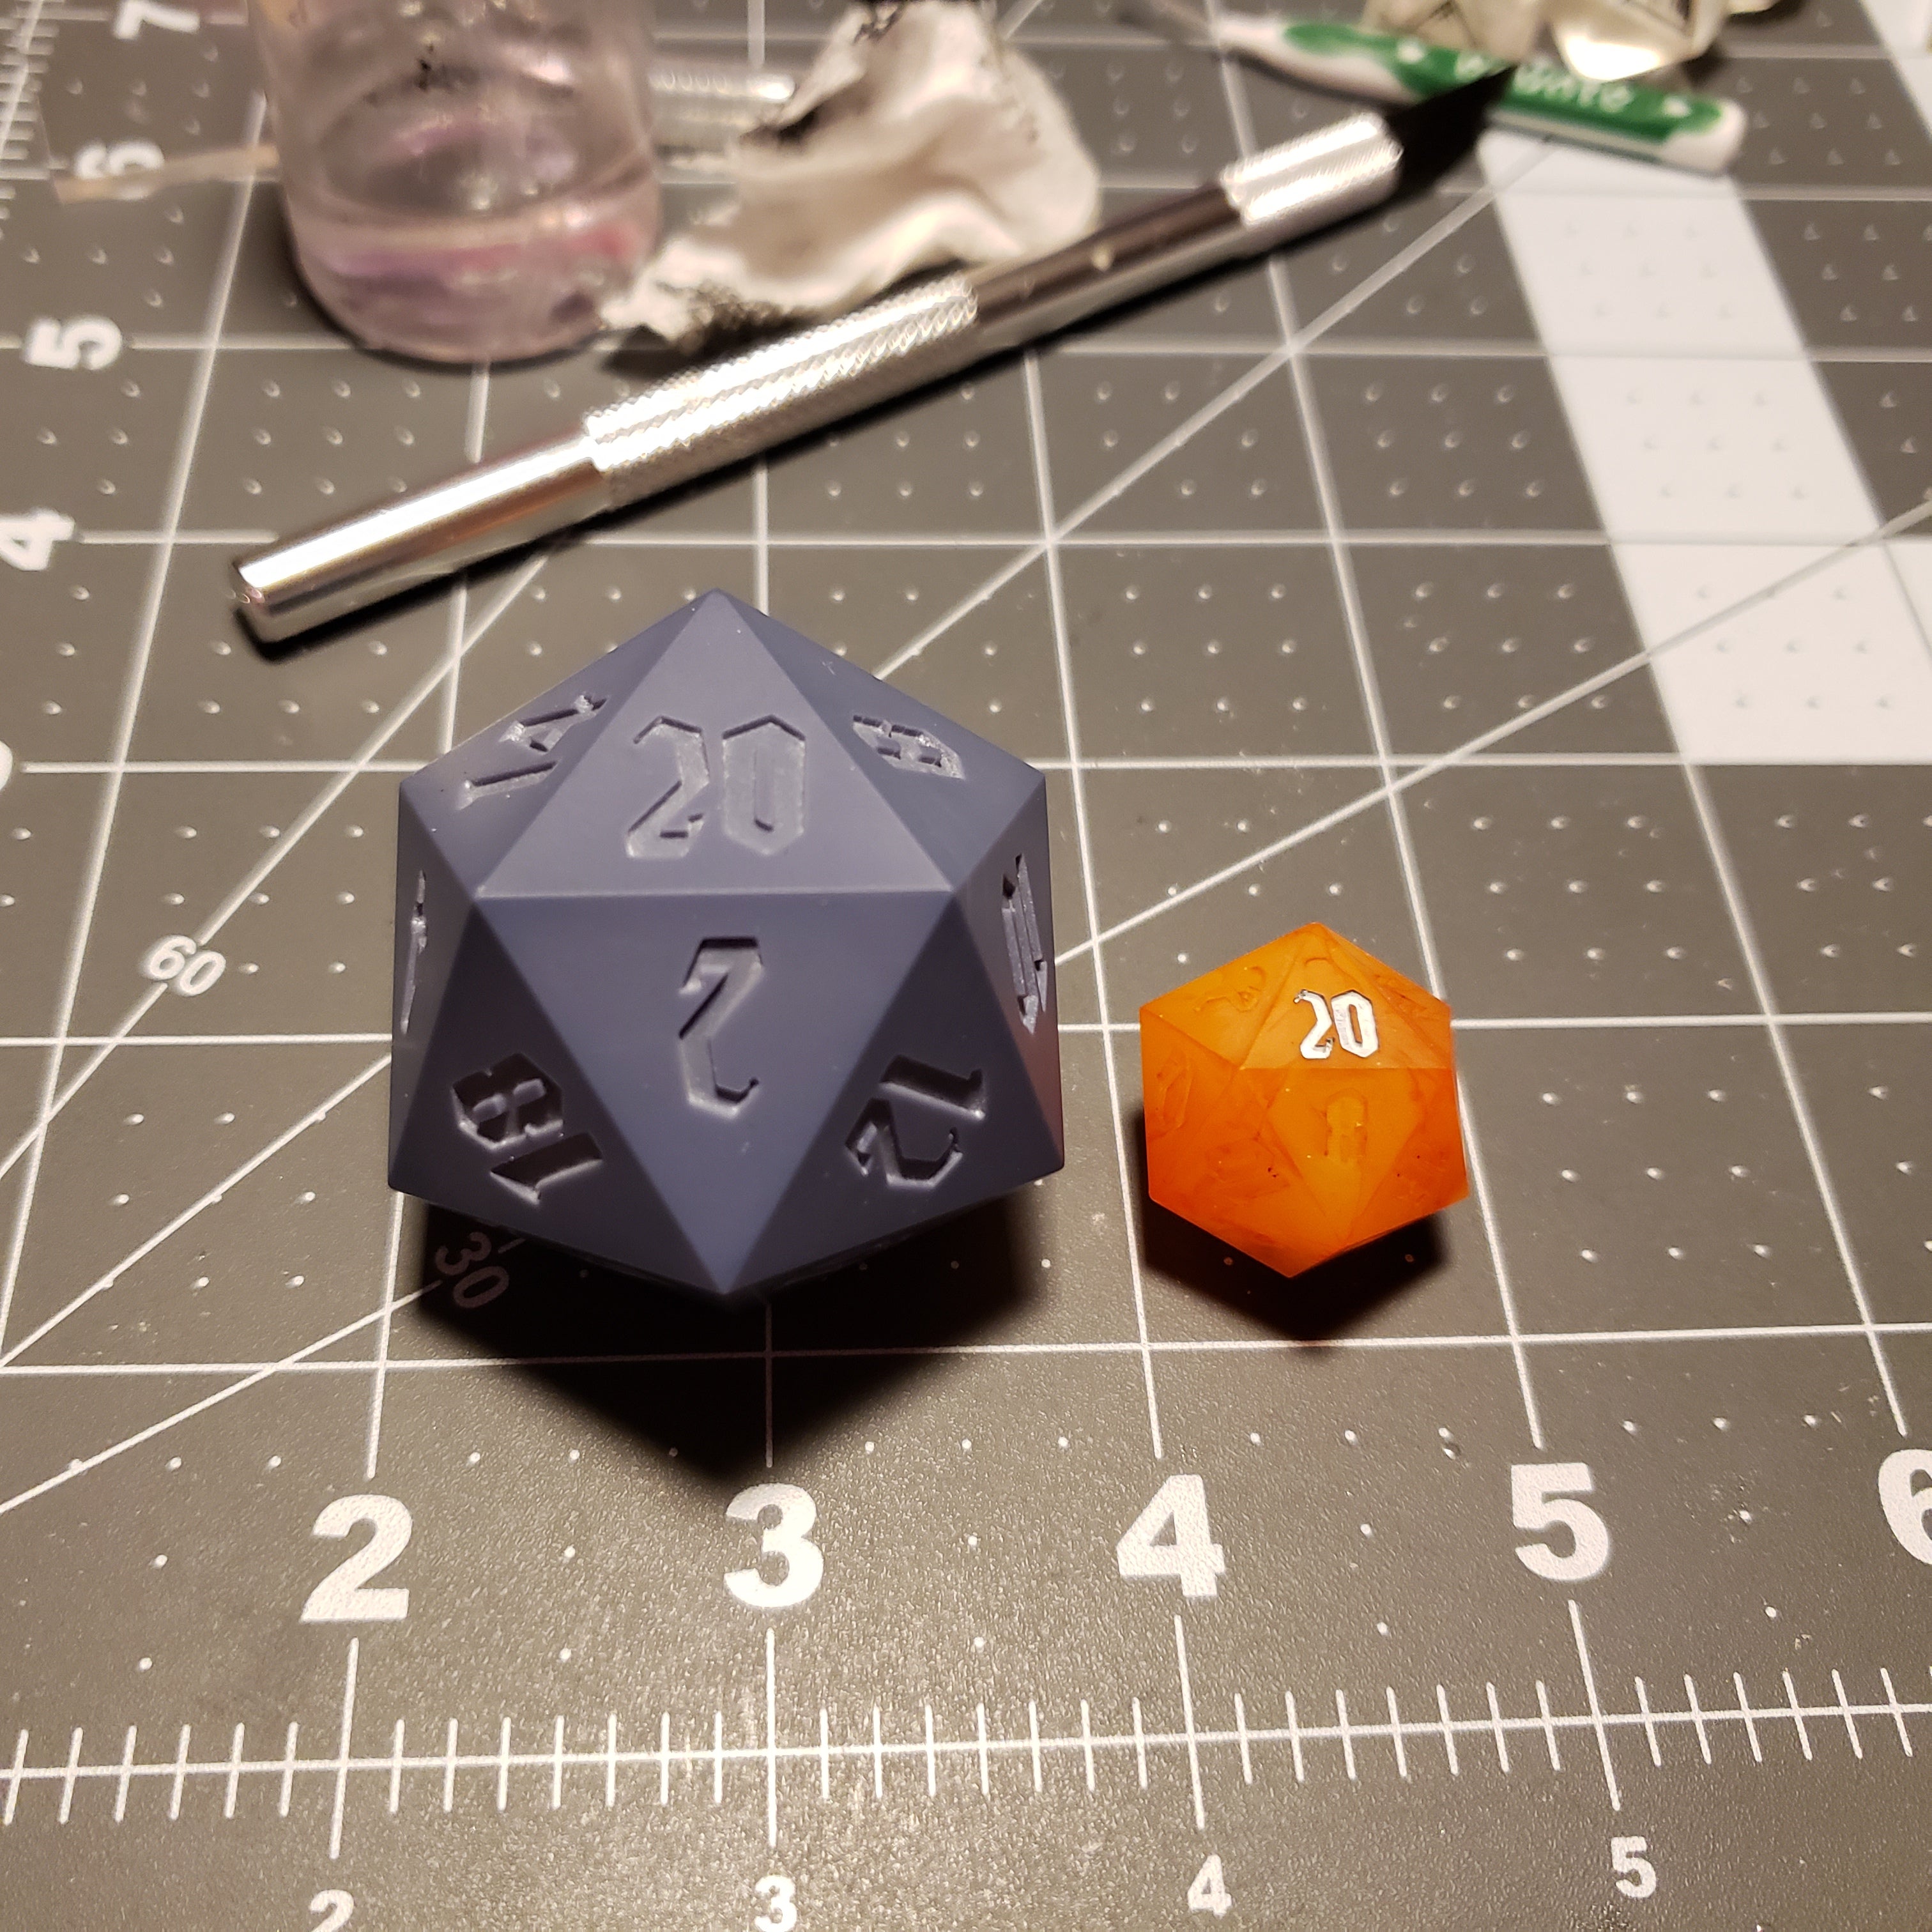 Almost 2 inich wide D20 Dice next to a standard size orange D20